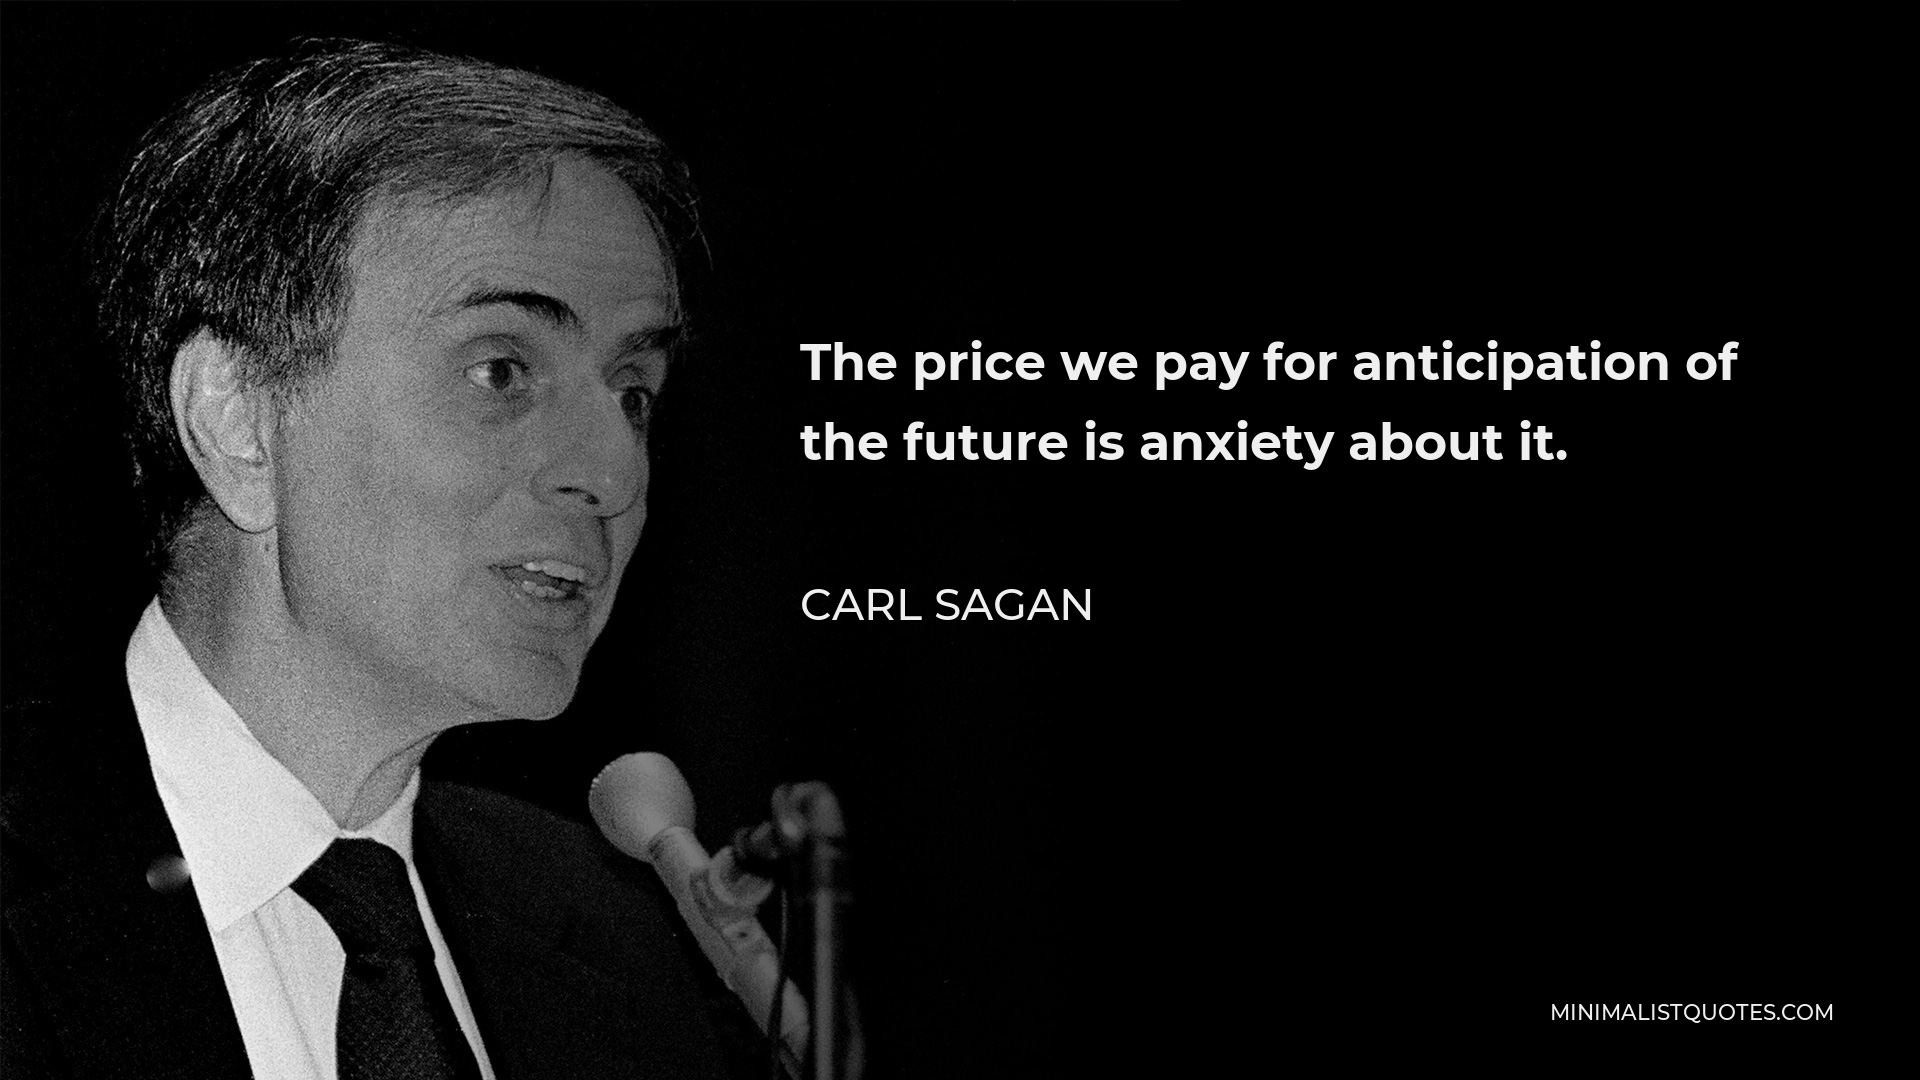 Carl Sagan Quote - The price we pay for anticipation of the future is anxiety about it.